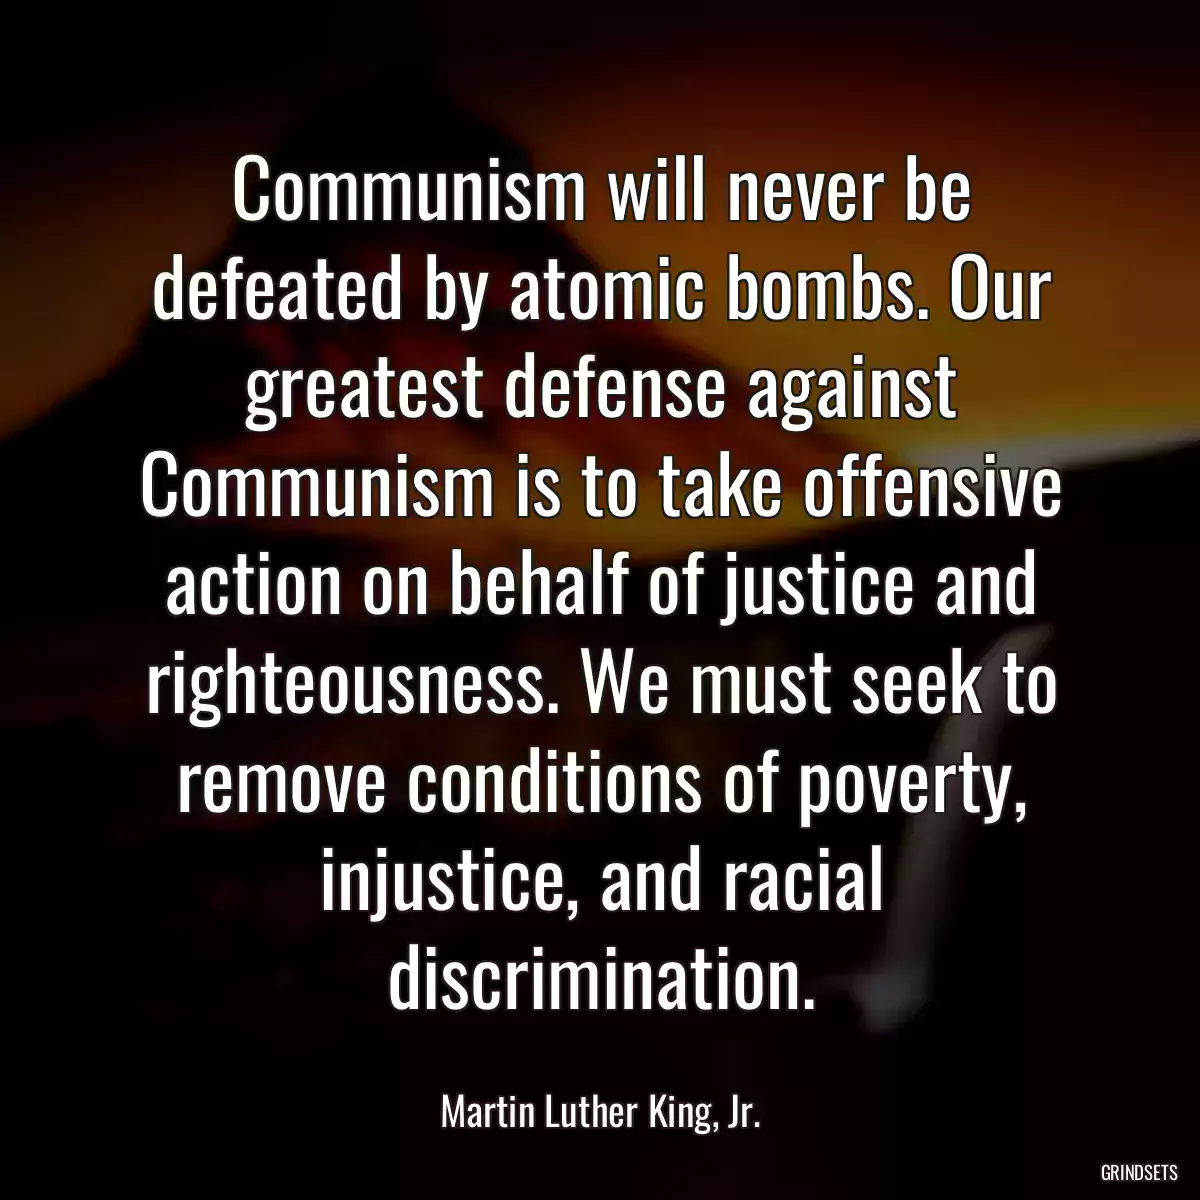 Communism will never be defeated by atomic bombs. Our greatest defense against Communism is to take offensive action on behalf of justice and righteousness. We must seek to remove conditions of poverty, injustice, and racial discrimination.